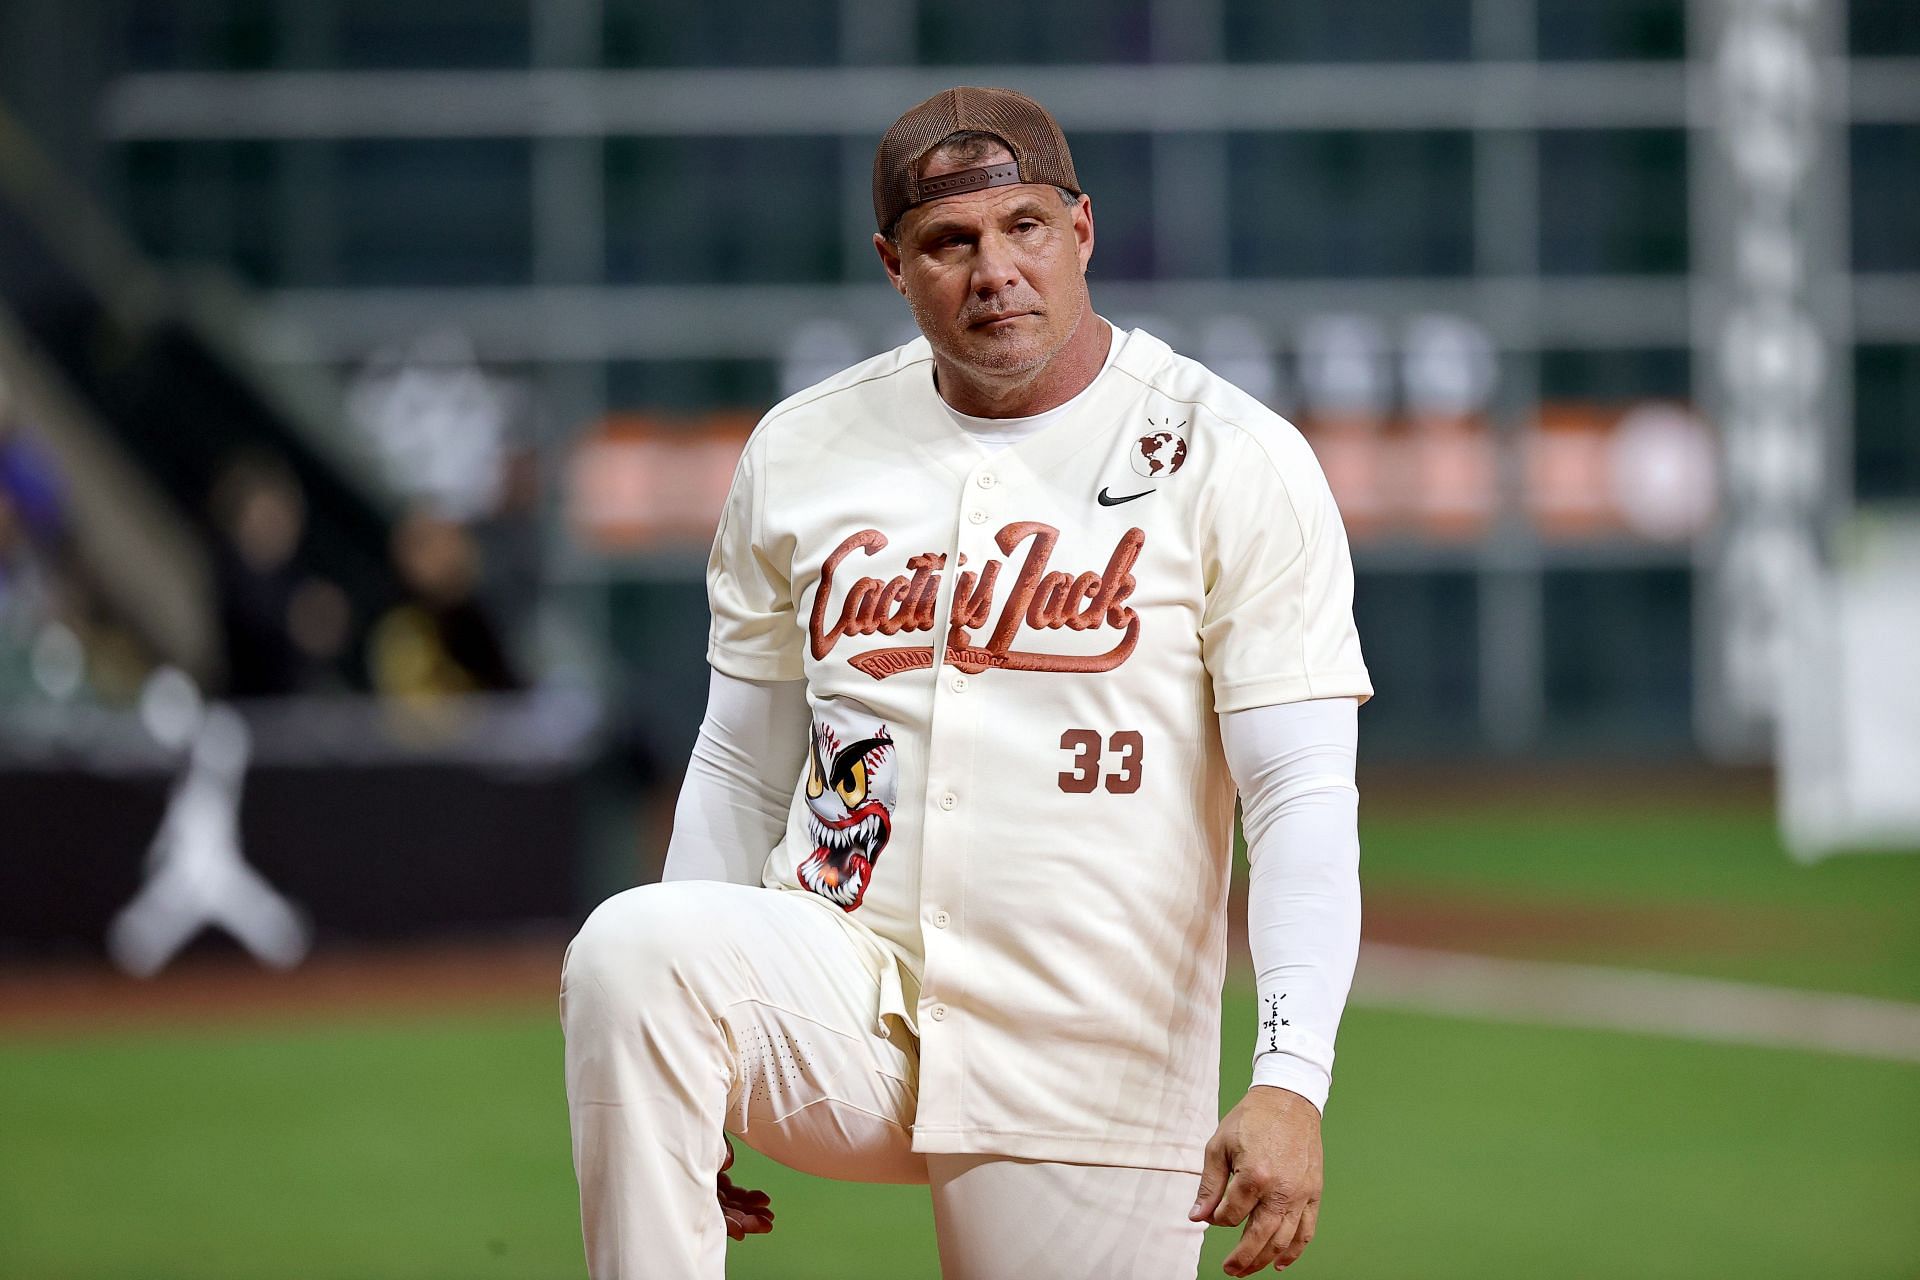 When former Oakland Athletics star Jose Canseco's fortune vanished  following two dramatic divorces